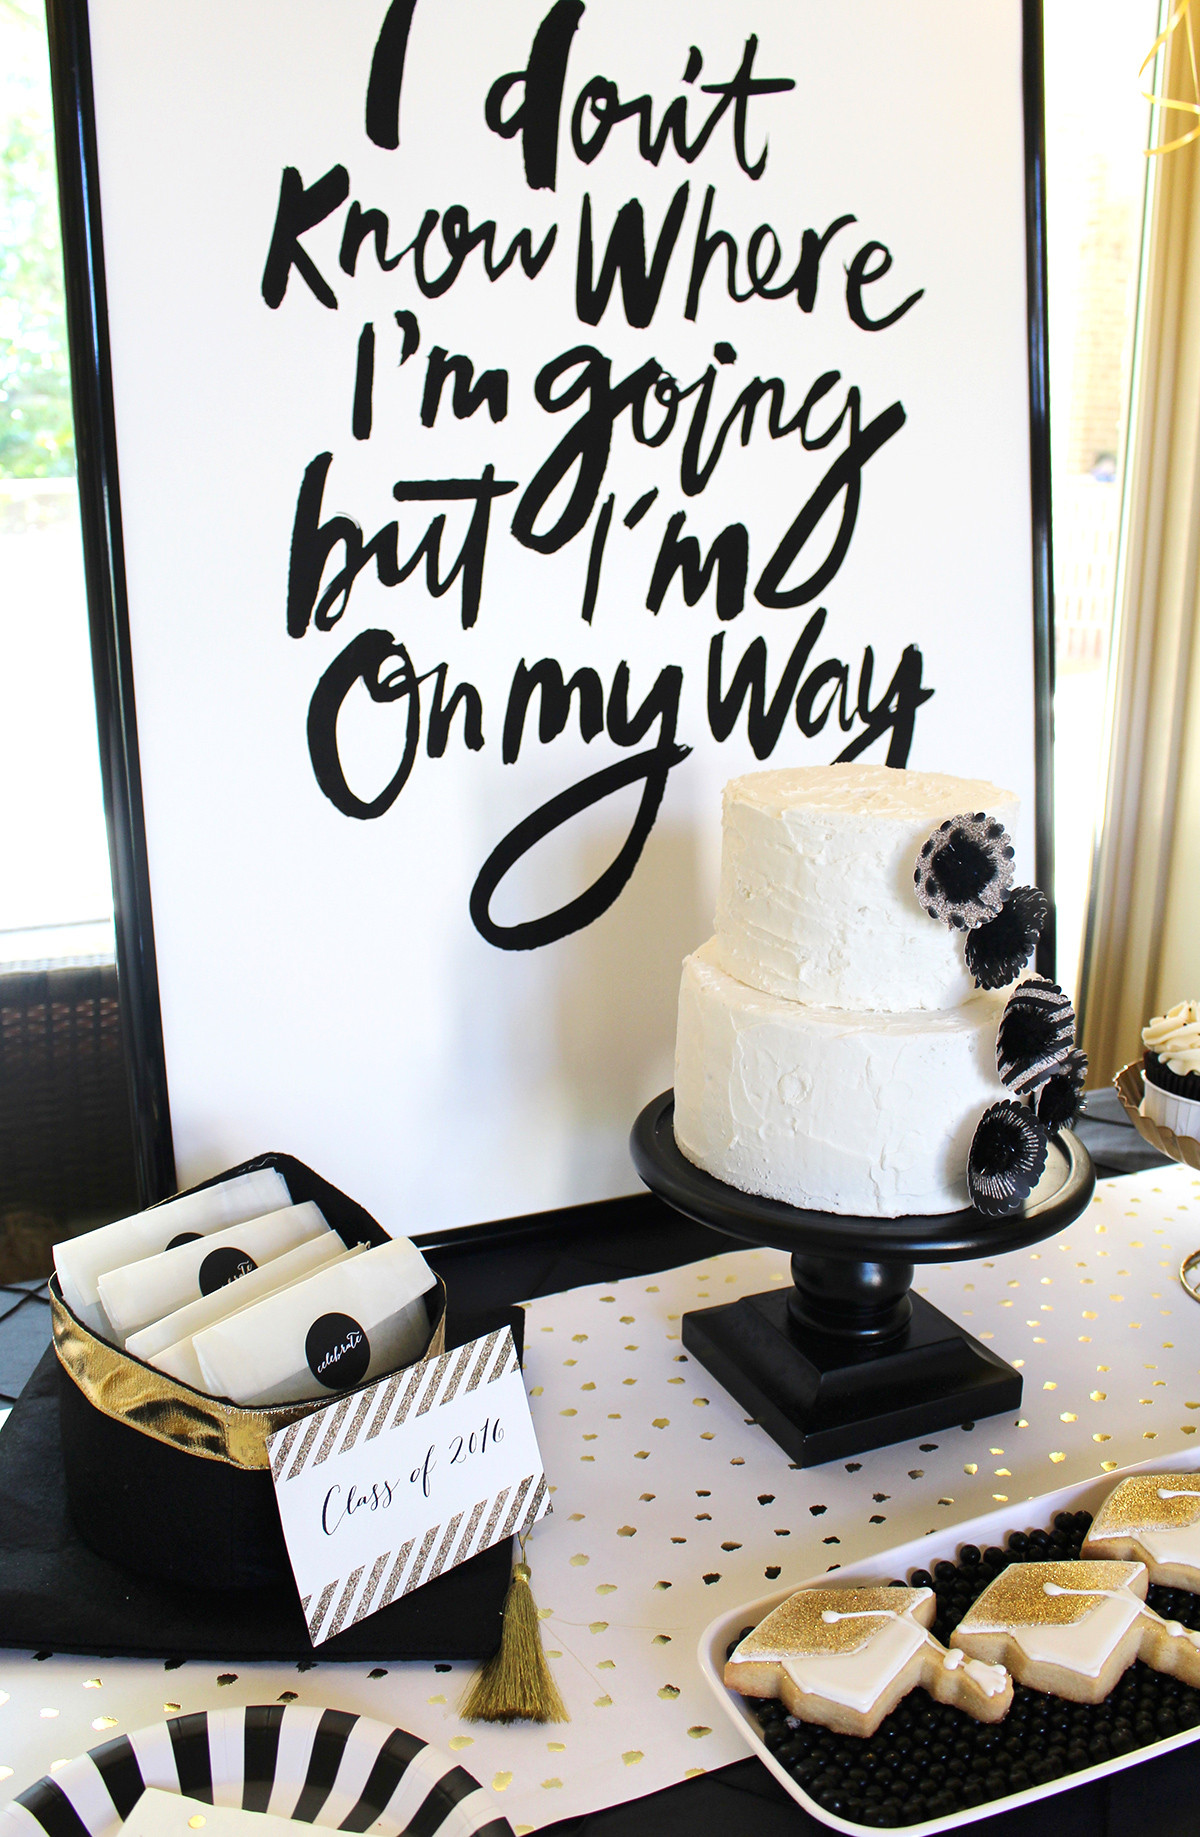 Graduation Party Ideas For College Students
 Stylish Black White Gold Graduation Party